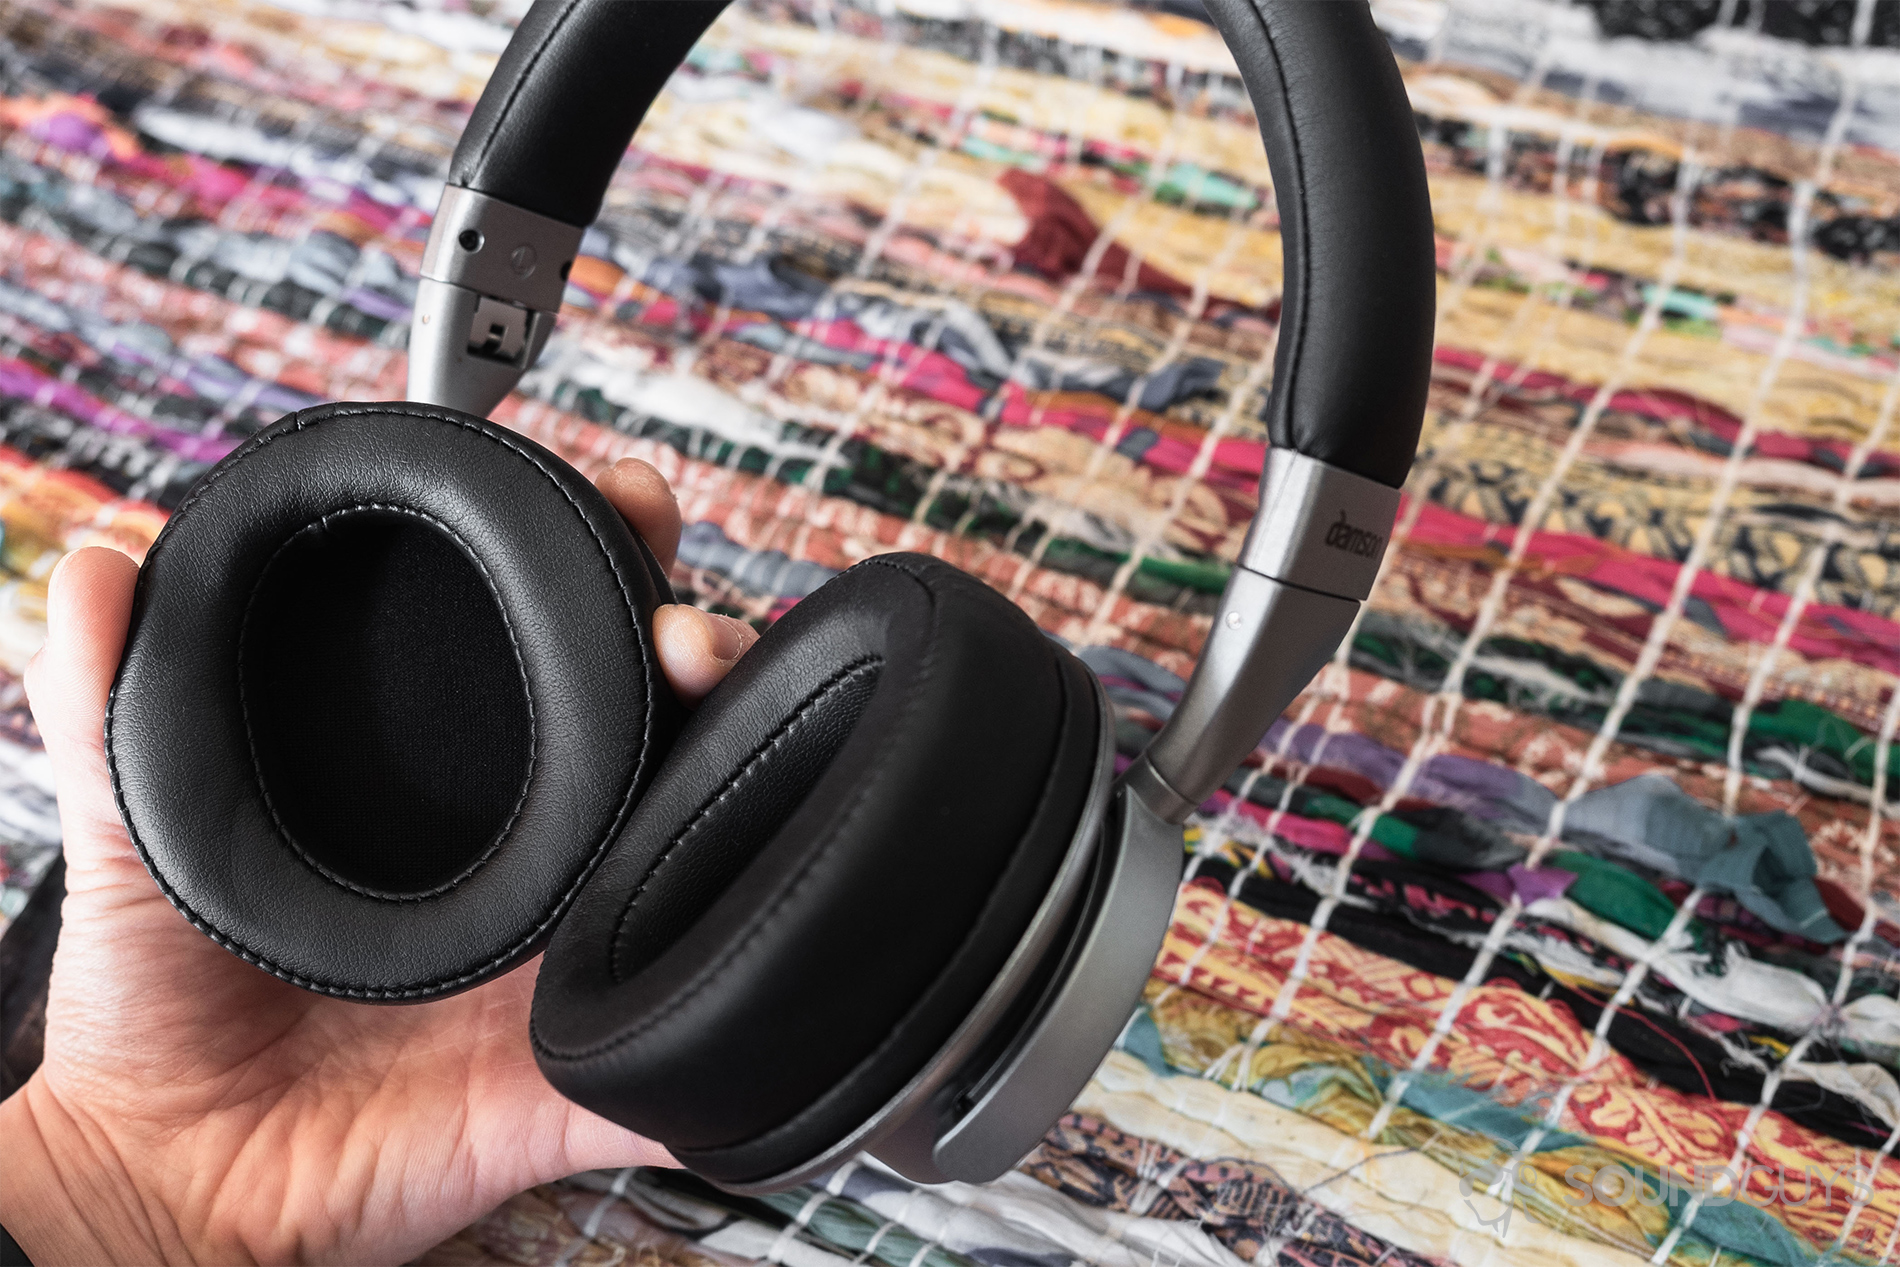 Damson HeadSpace Active Noise-Canceling review: The headphones tilted in the hand to illustrate the size of the ear cups.